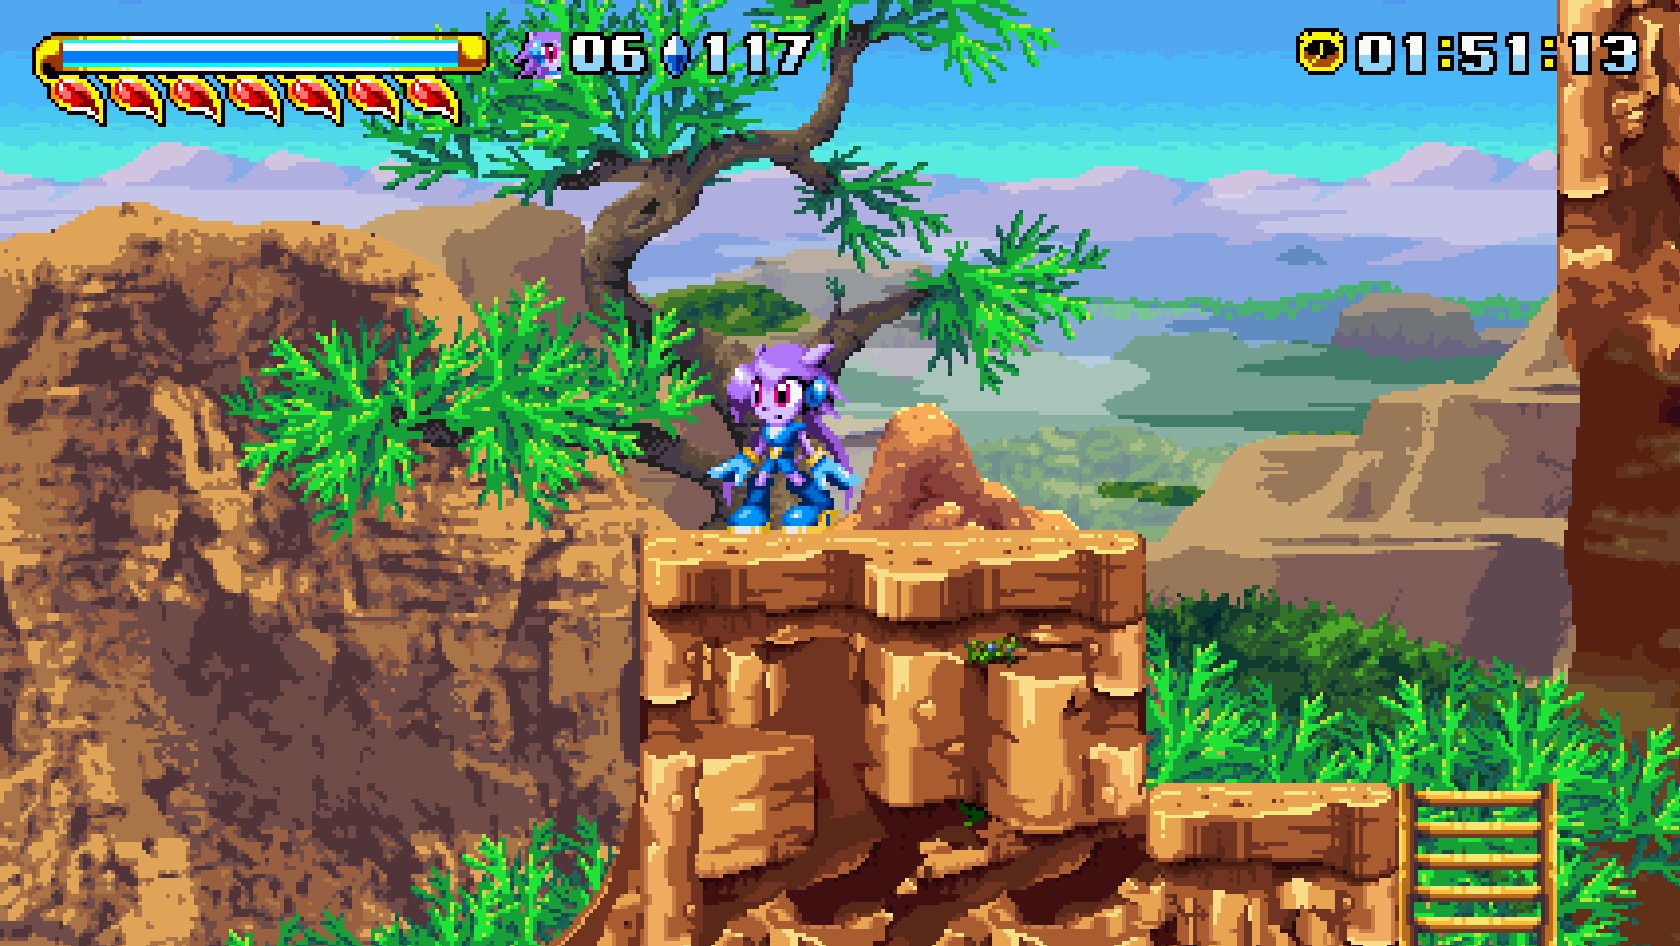 freedom planet 2 dragon valley music